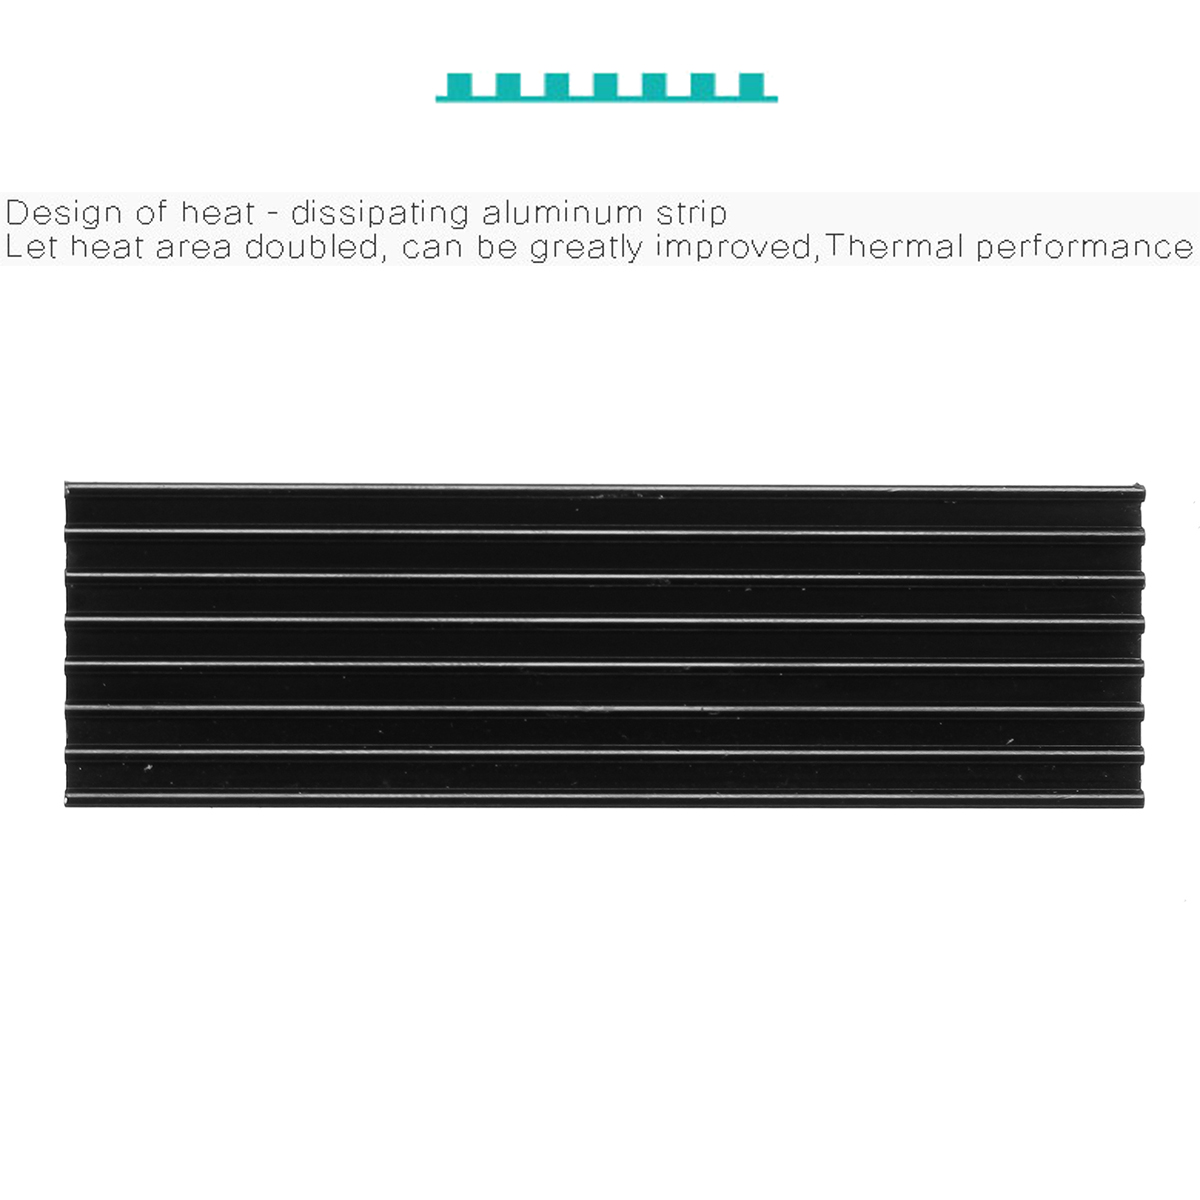 M2-NGFF-NVMe-2280-PCIE-SSD-Passive-Cooling-Aluminum-Fins-Heat-Sink-Thermal-Pad-1199957